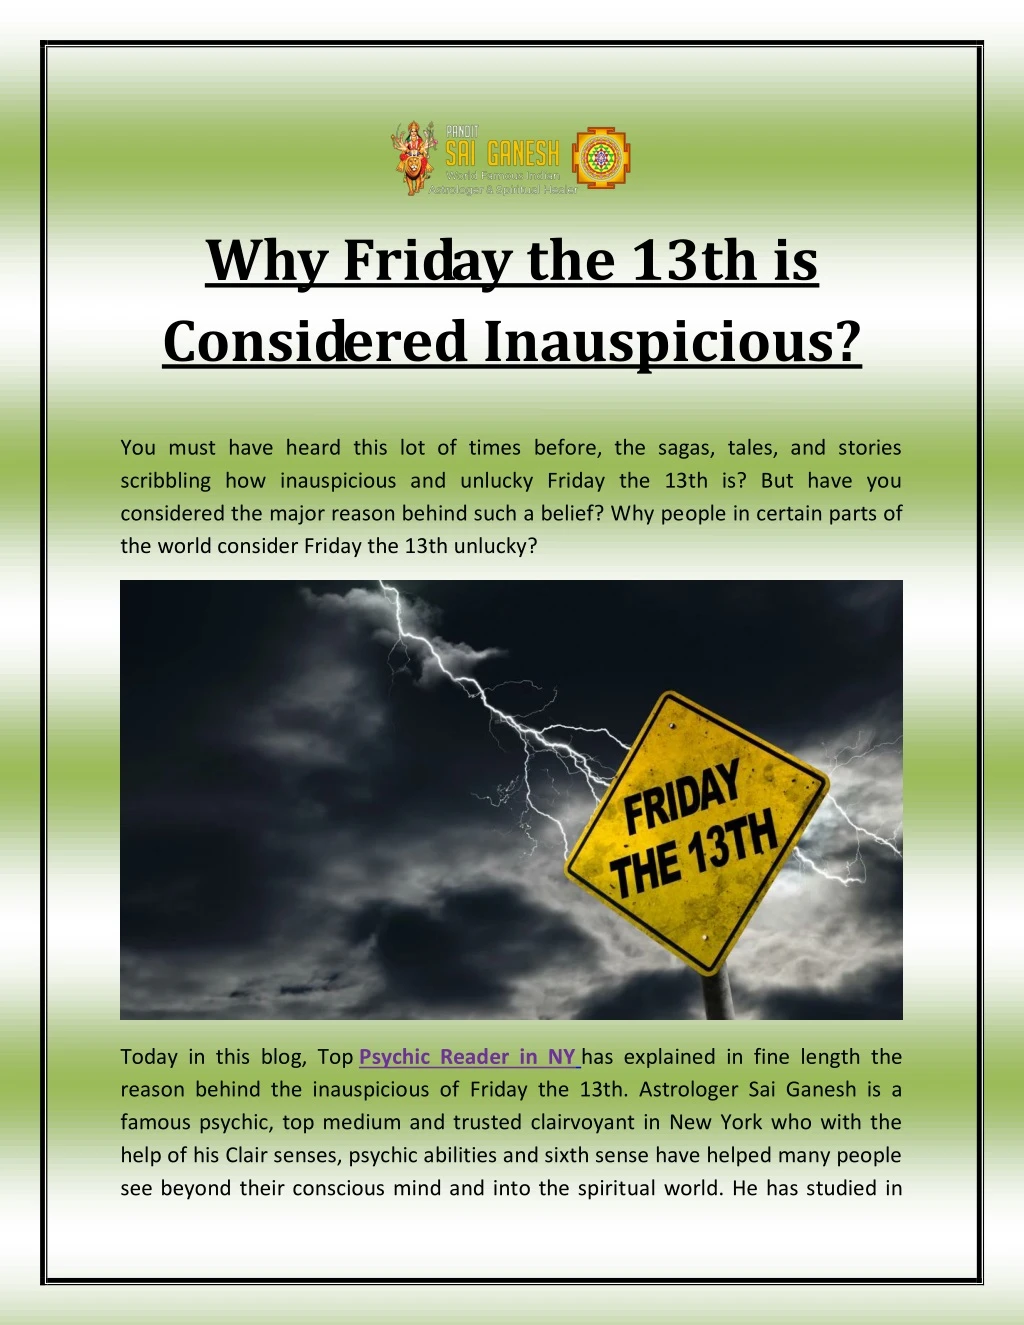 why friday the 13th is considered inauspicious